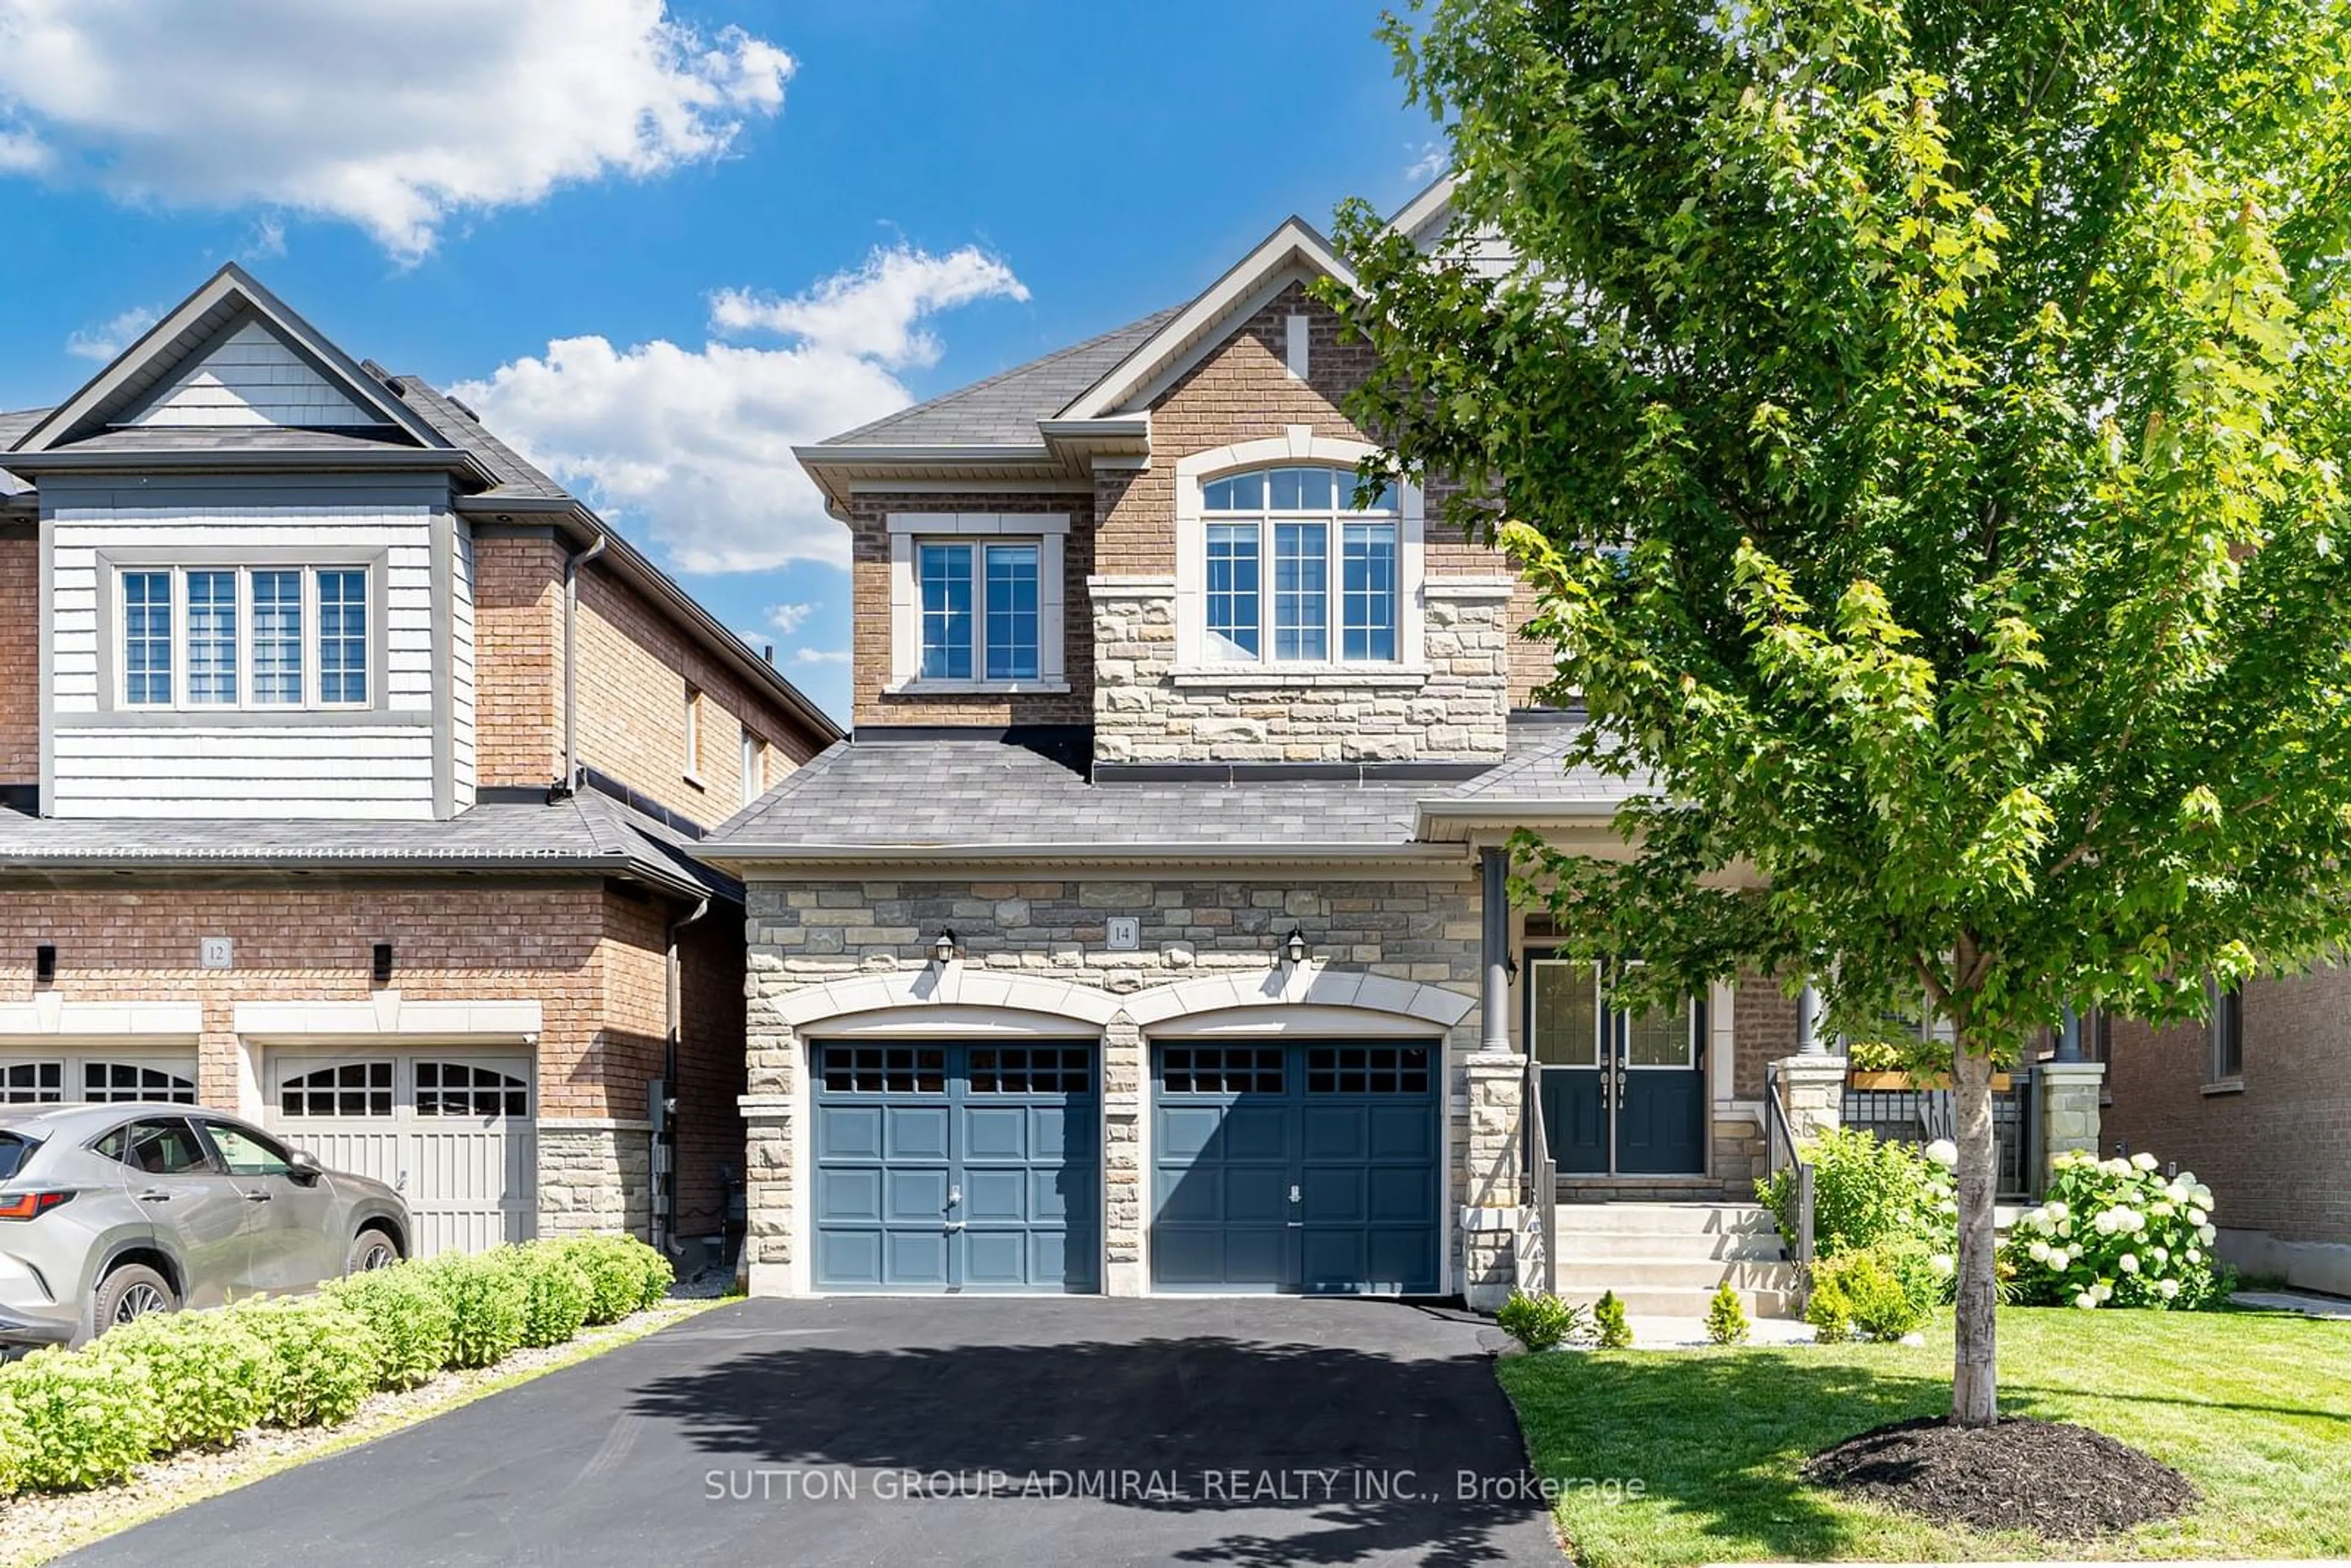 Home with brick exterior material for 14 Baleberry Cres, East Gwillimbury Ontario L9N 0P2